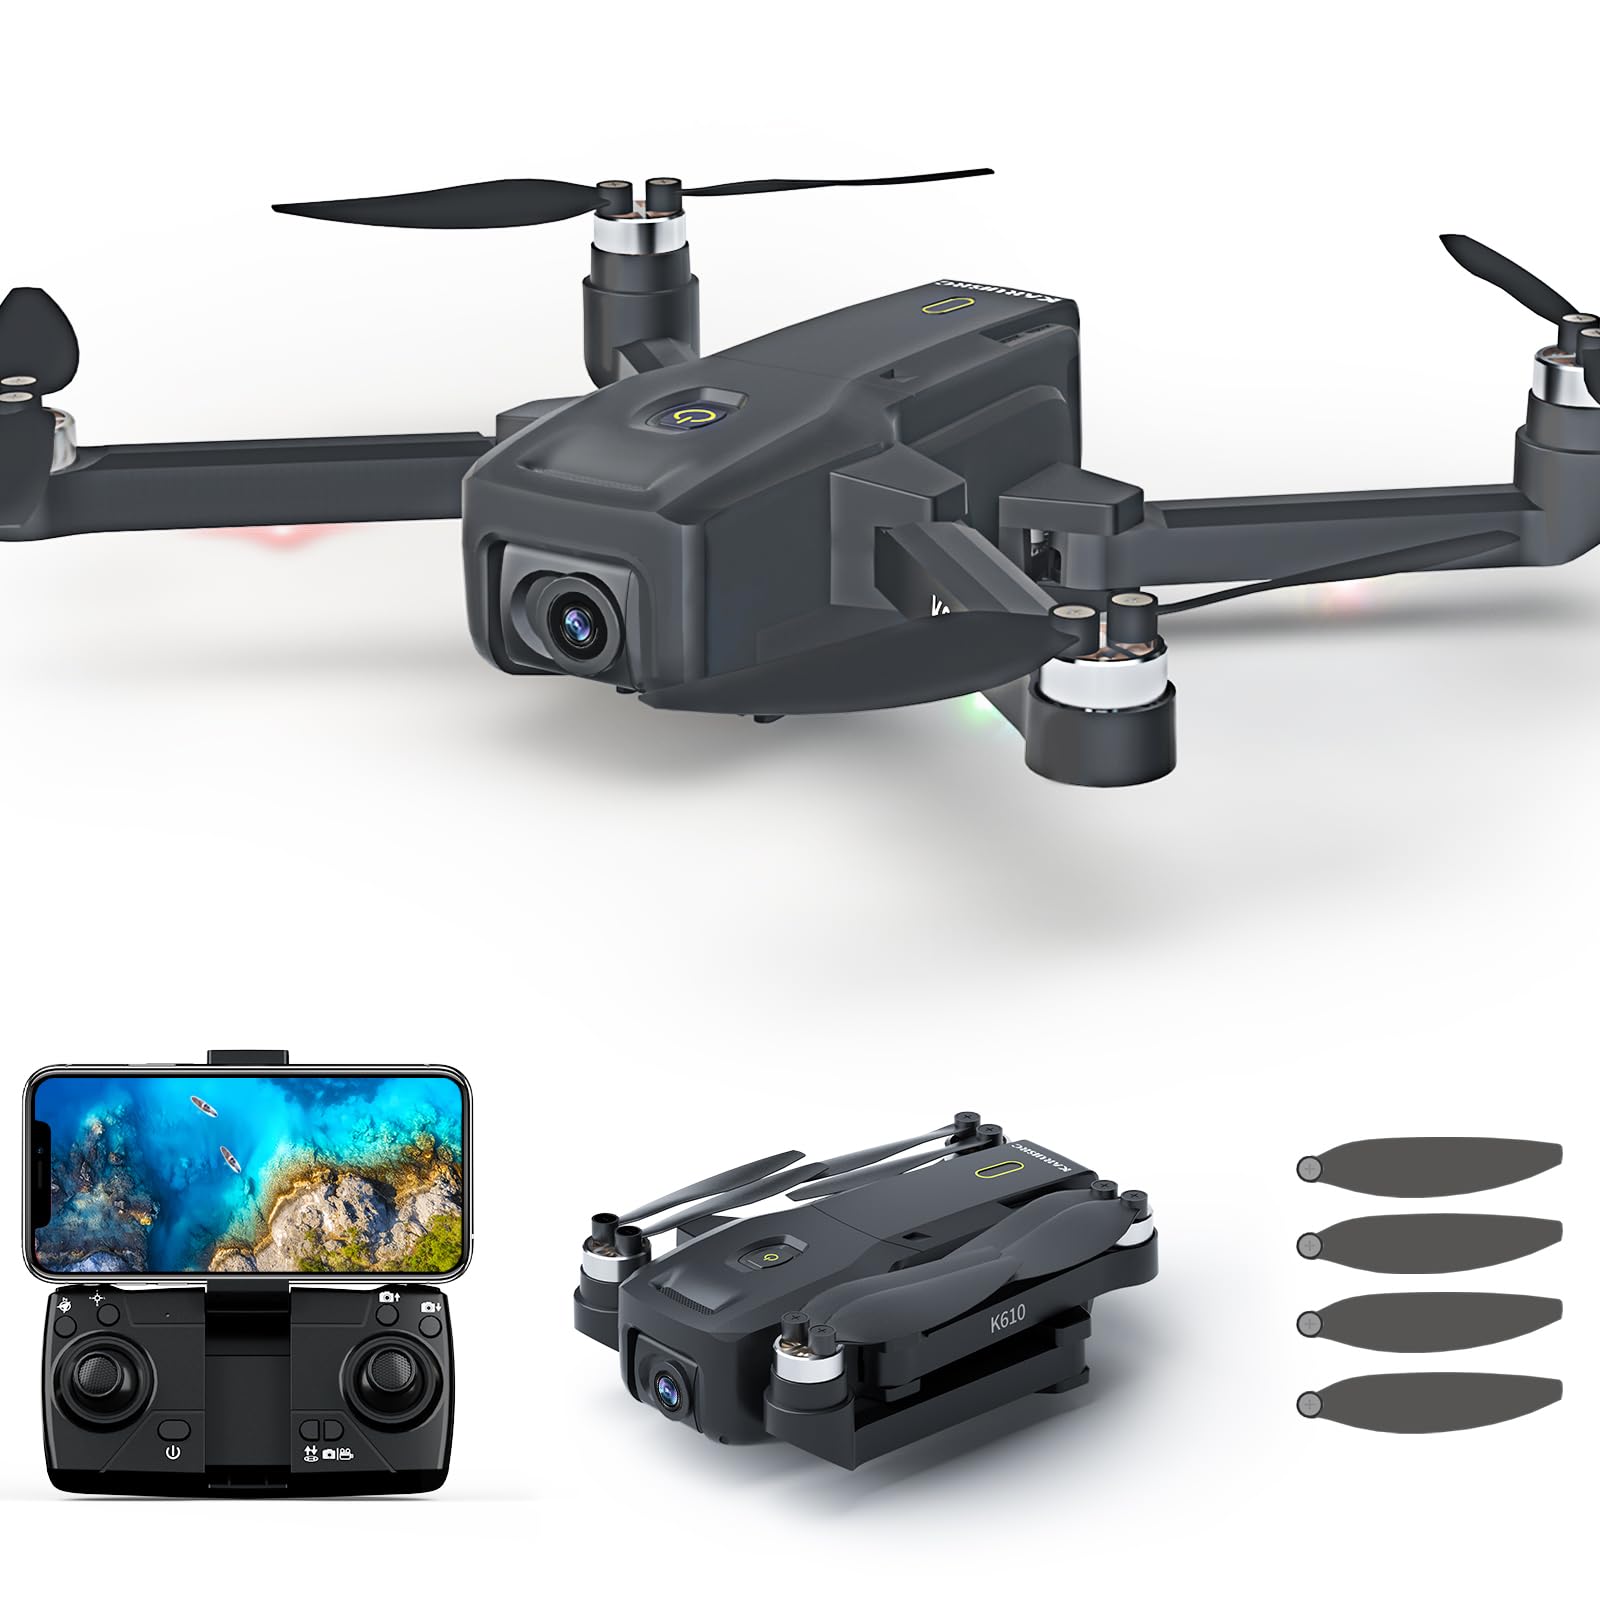 GPS Drone with Camera for Adults 4K SONY IMX Camera,Brushless AIdrone with Auto Return Home,Under 250g,Drones for Adults 5GHz Wifi FPV Video drone for Beginner,RC Quadcopter with Smart APP,Follow Me